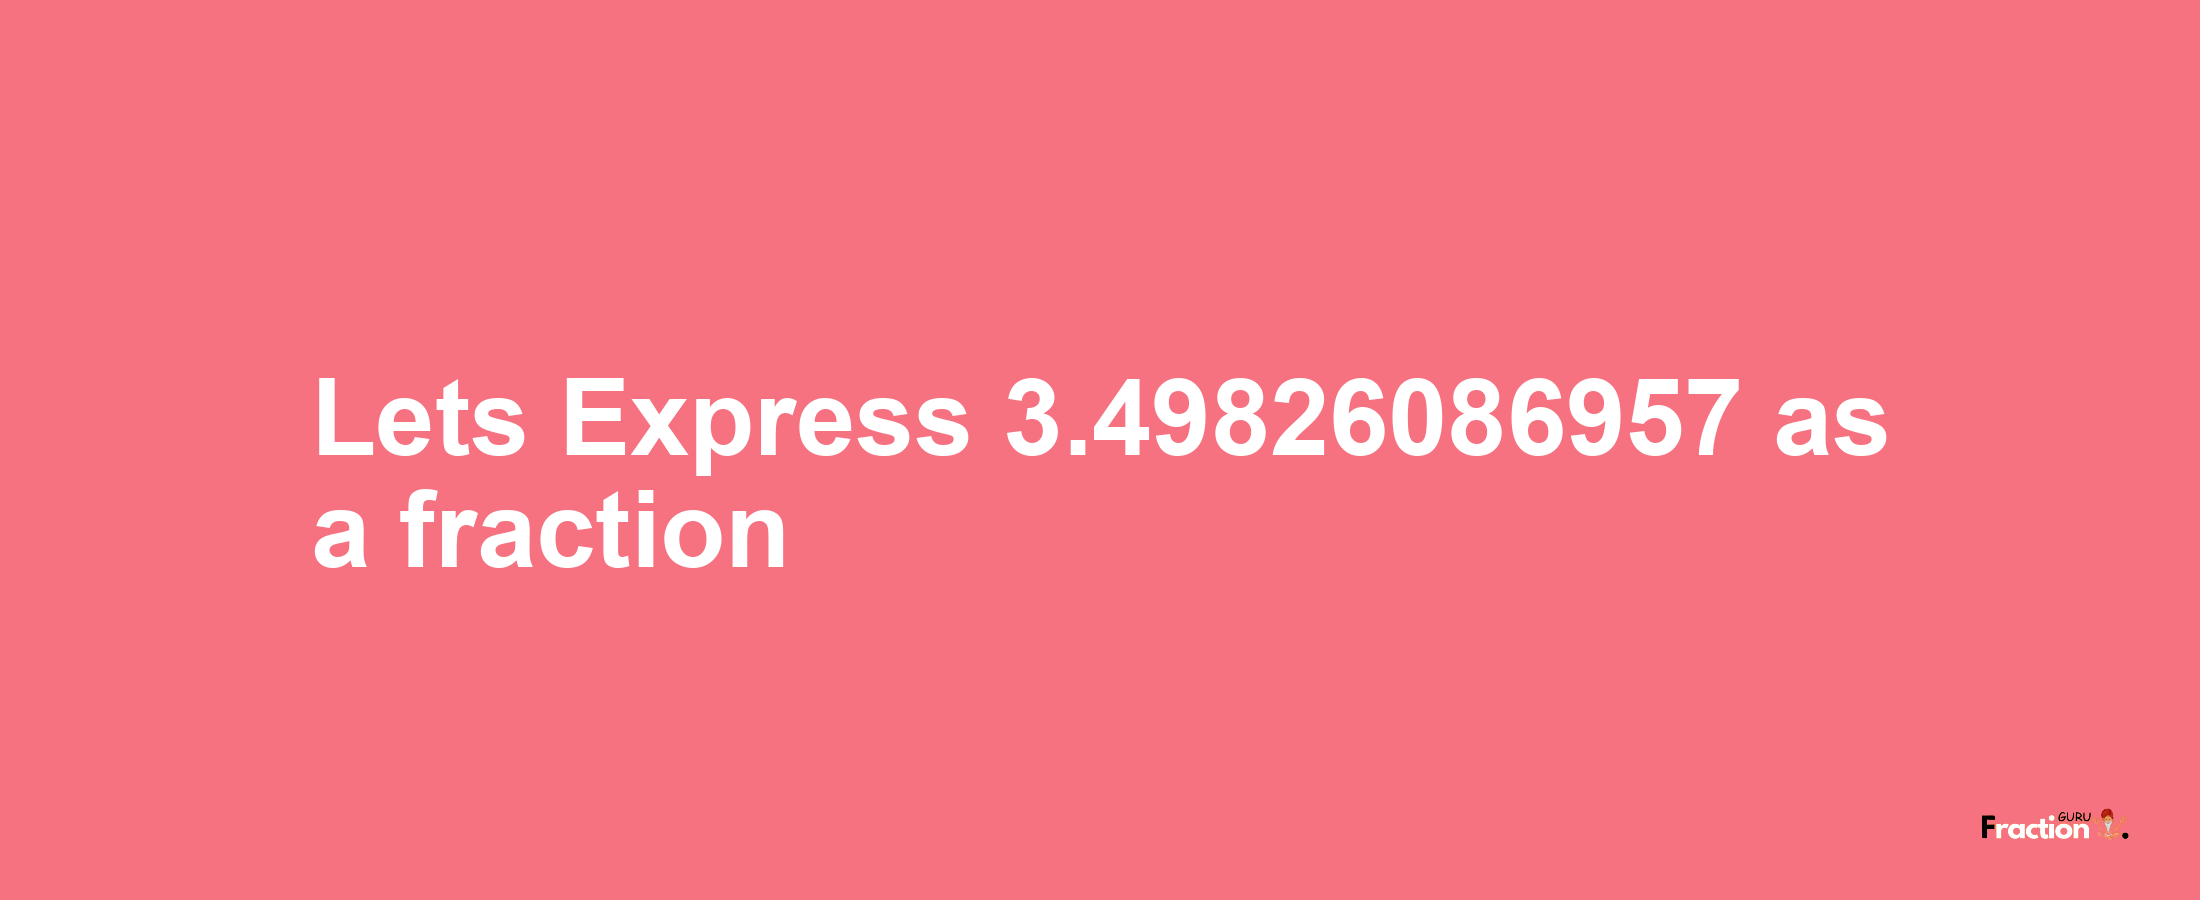 Lets Express 3.49826086957 as afraction